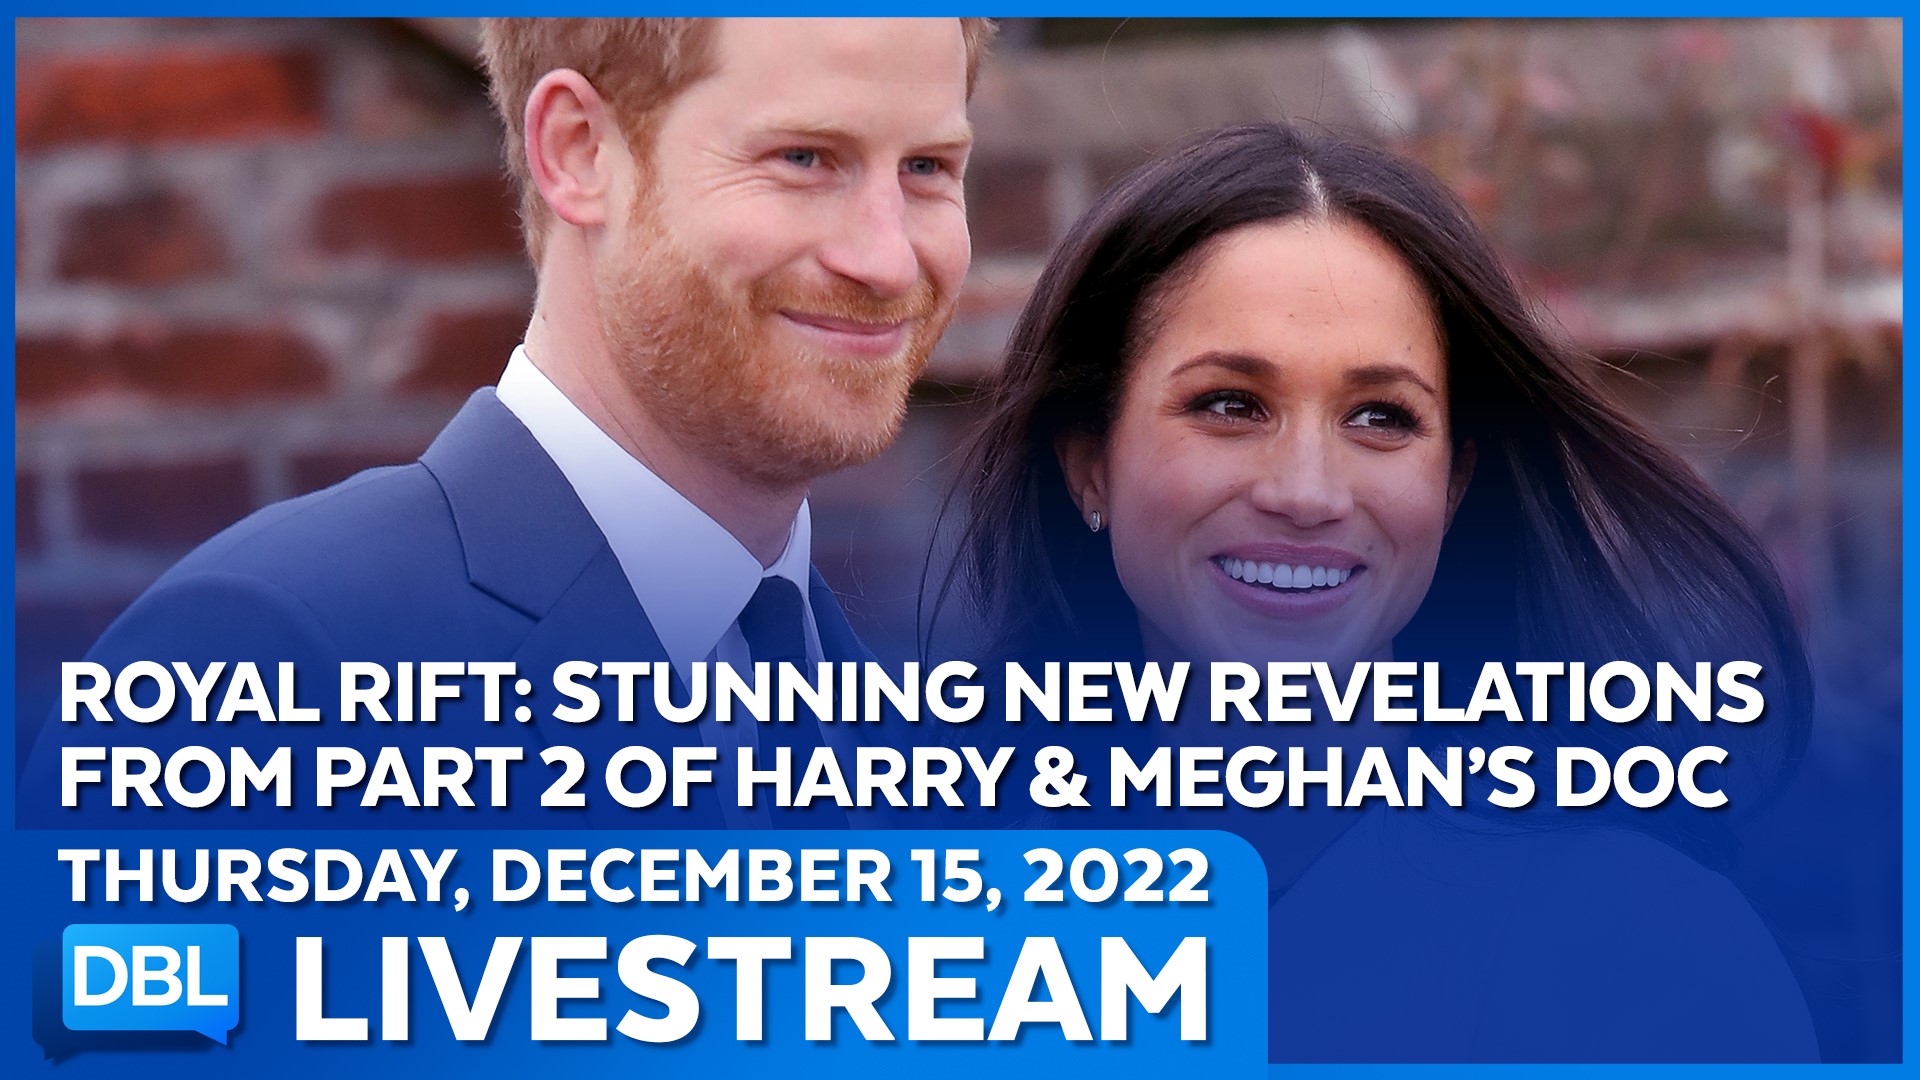 New revelations from the final three episodes of Harry & Meghan's documentary series; Starbucks gets pushback over tipping policy; Research on the 'vocal fry.'